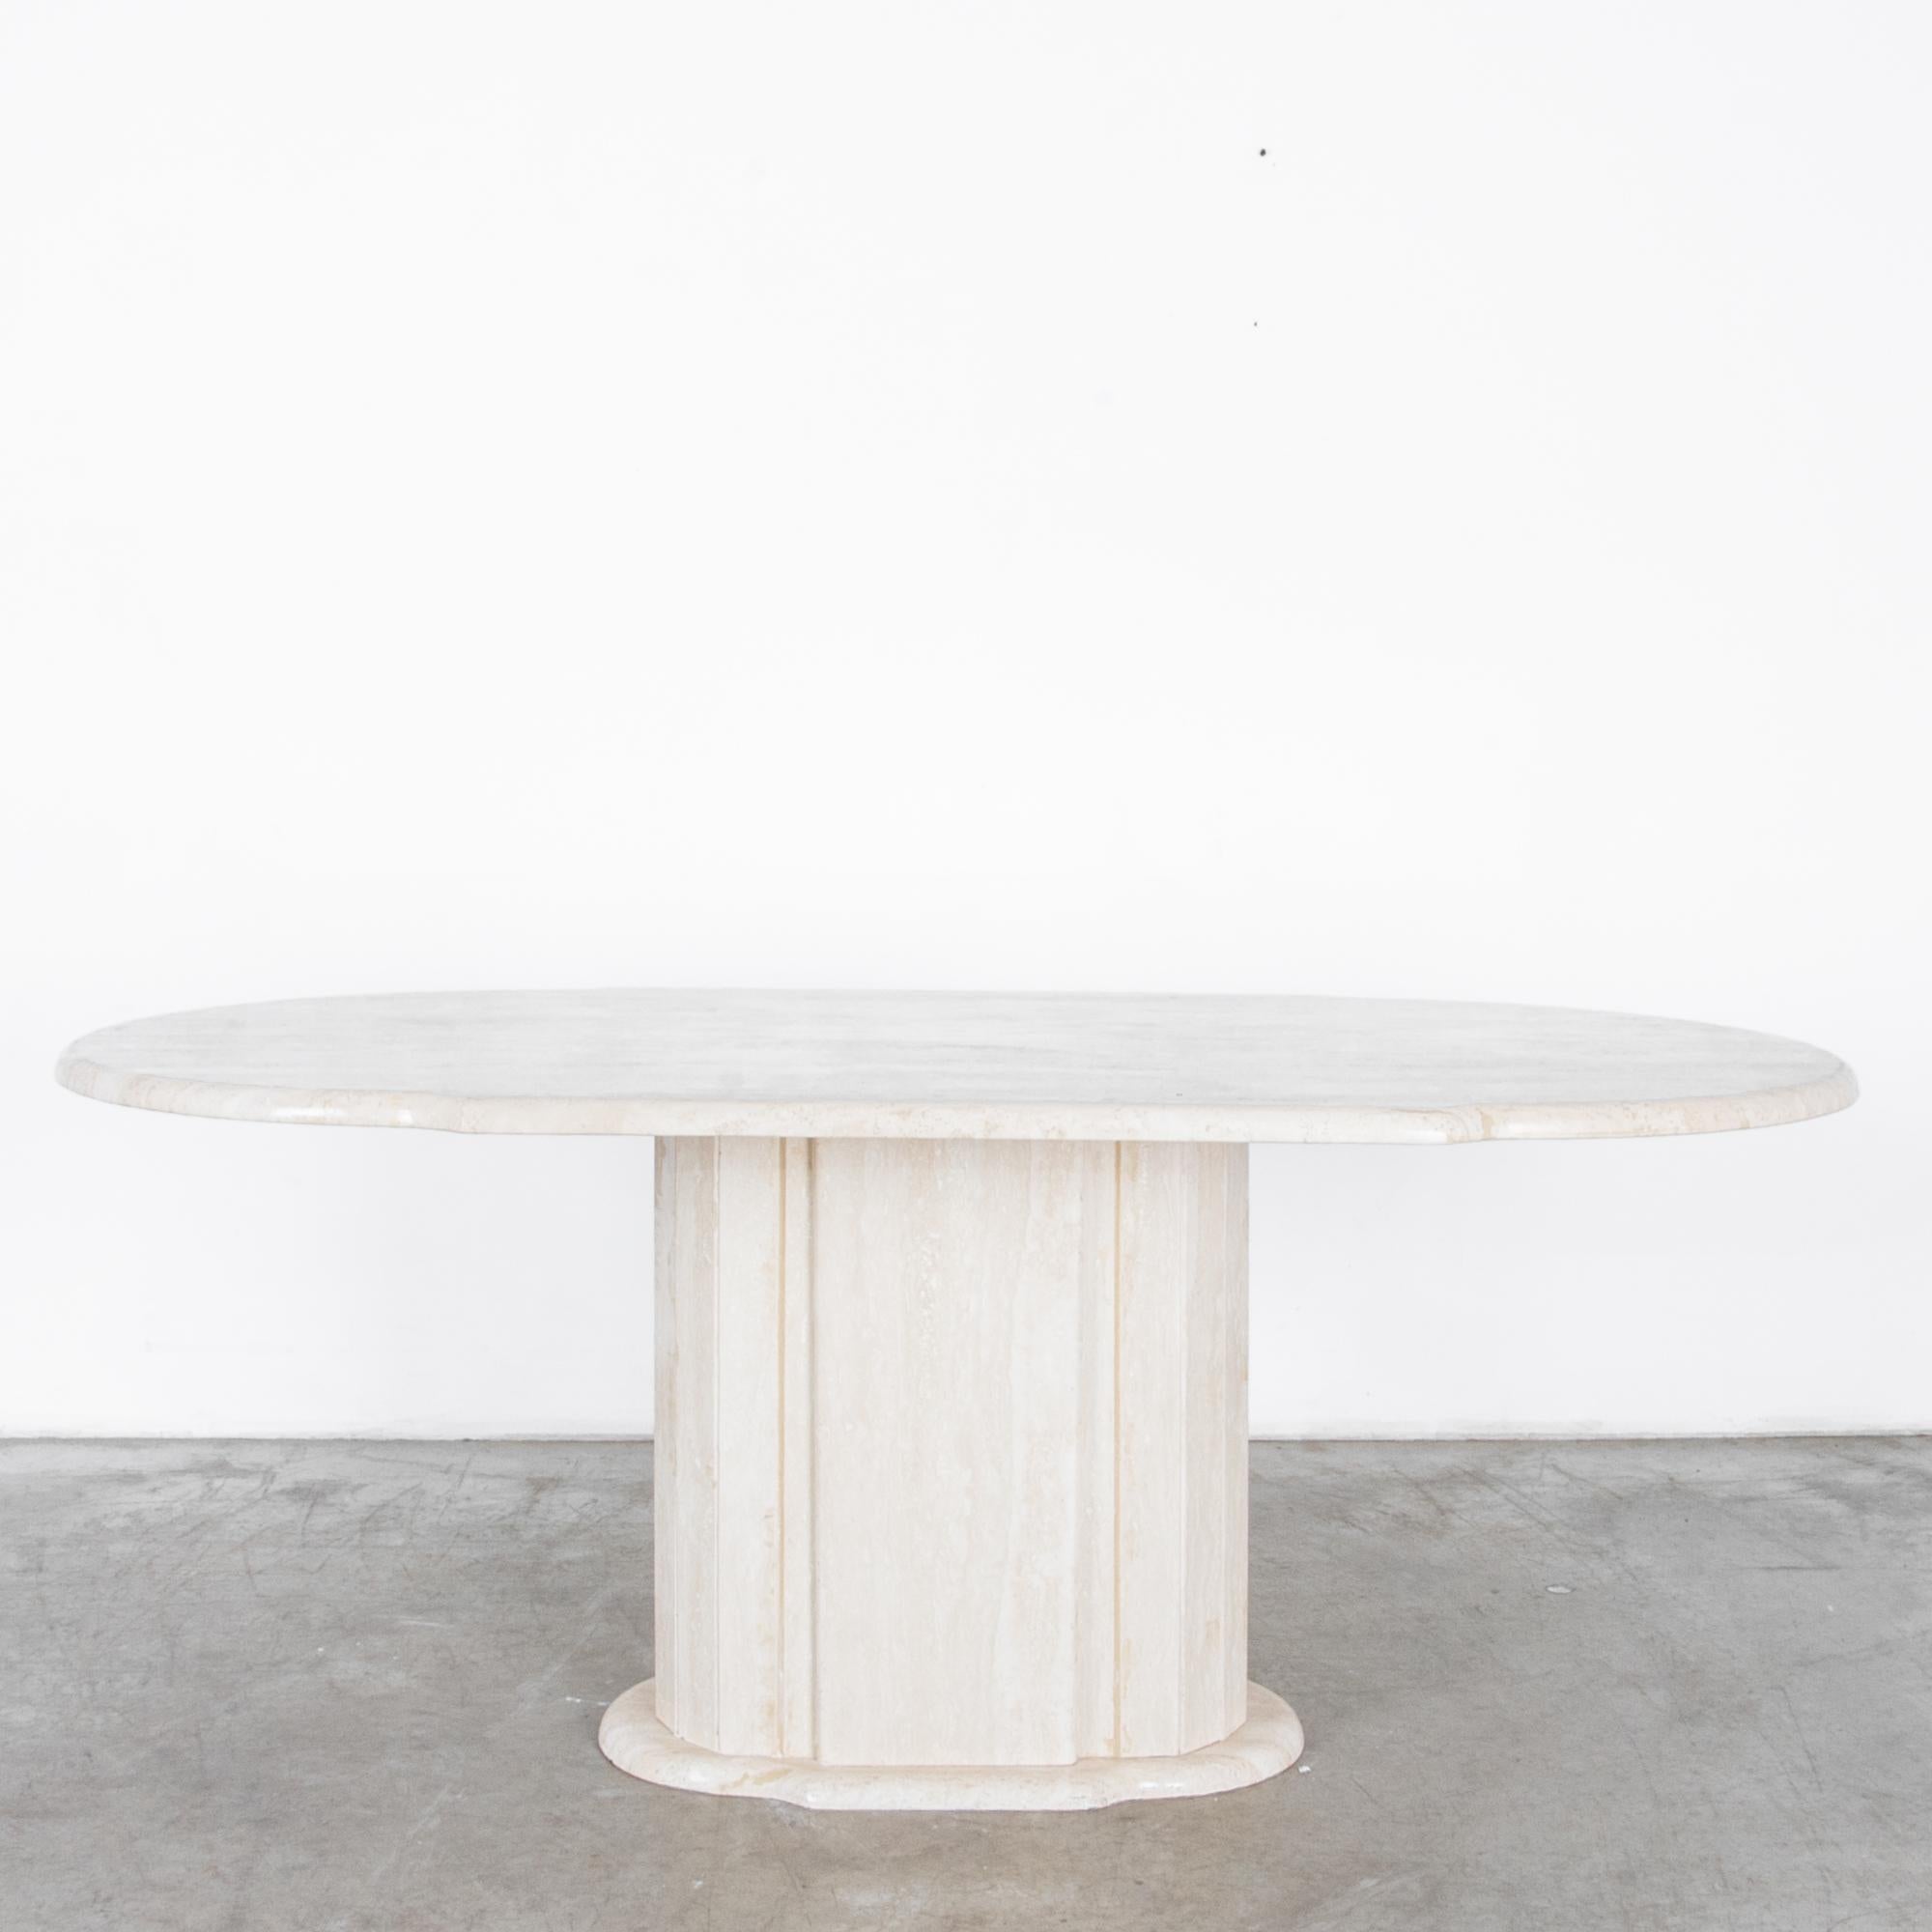 A cantilevered slab of light travertine rests on a faceted round base in this stylish and simple dining table. The tabletop is carved with rounded edge profile.

Stone is a material rich in itself; echoing classical sculpture, a design that's